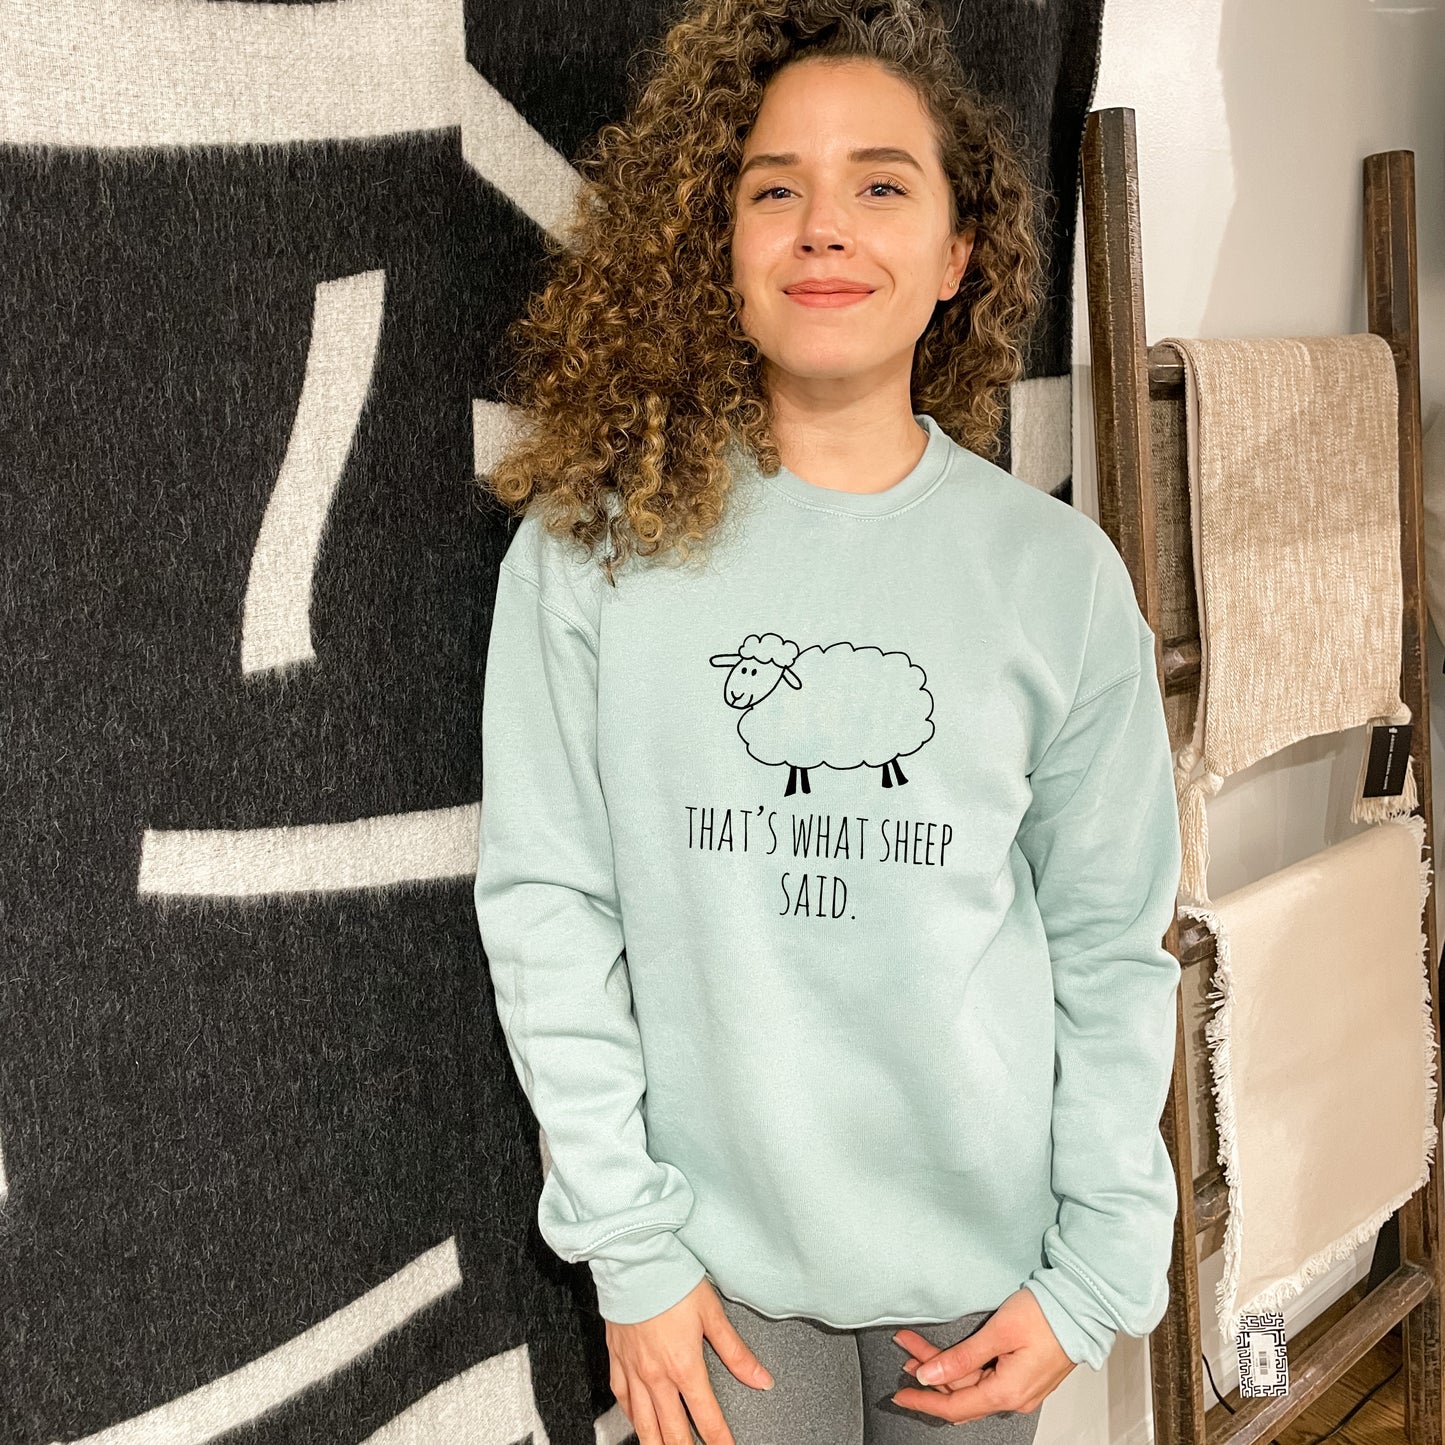 That's What Sheep Said - Unisex Sweatshirt - Heather Gray or Dusty Blue